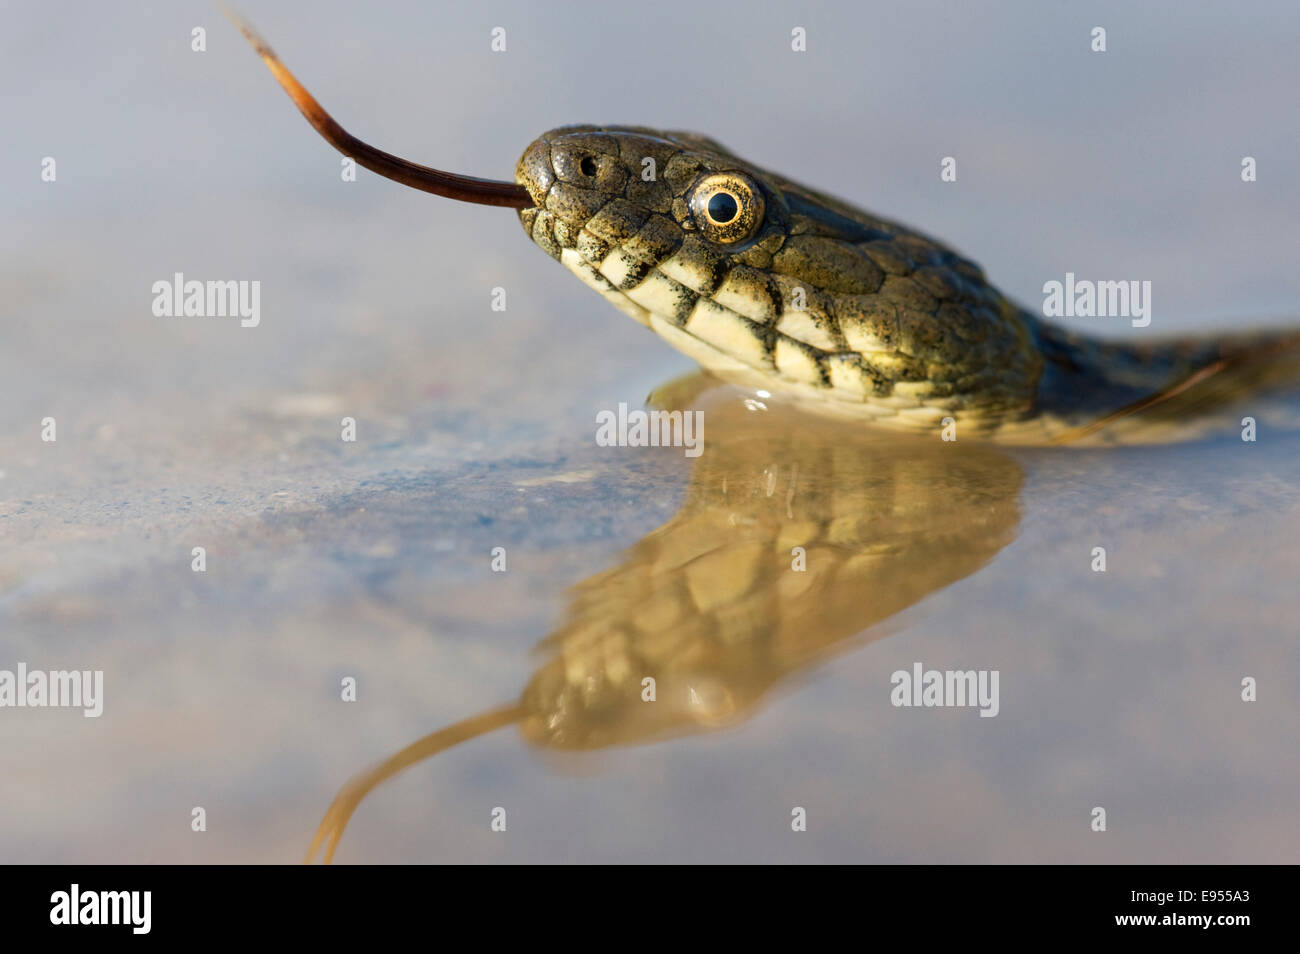 Dice Snake (Natrix tessellata), darting its tongue, in the water, with reflection, Bulgaria Stock Photo